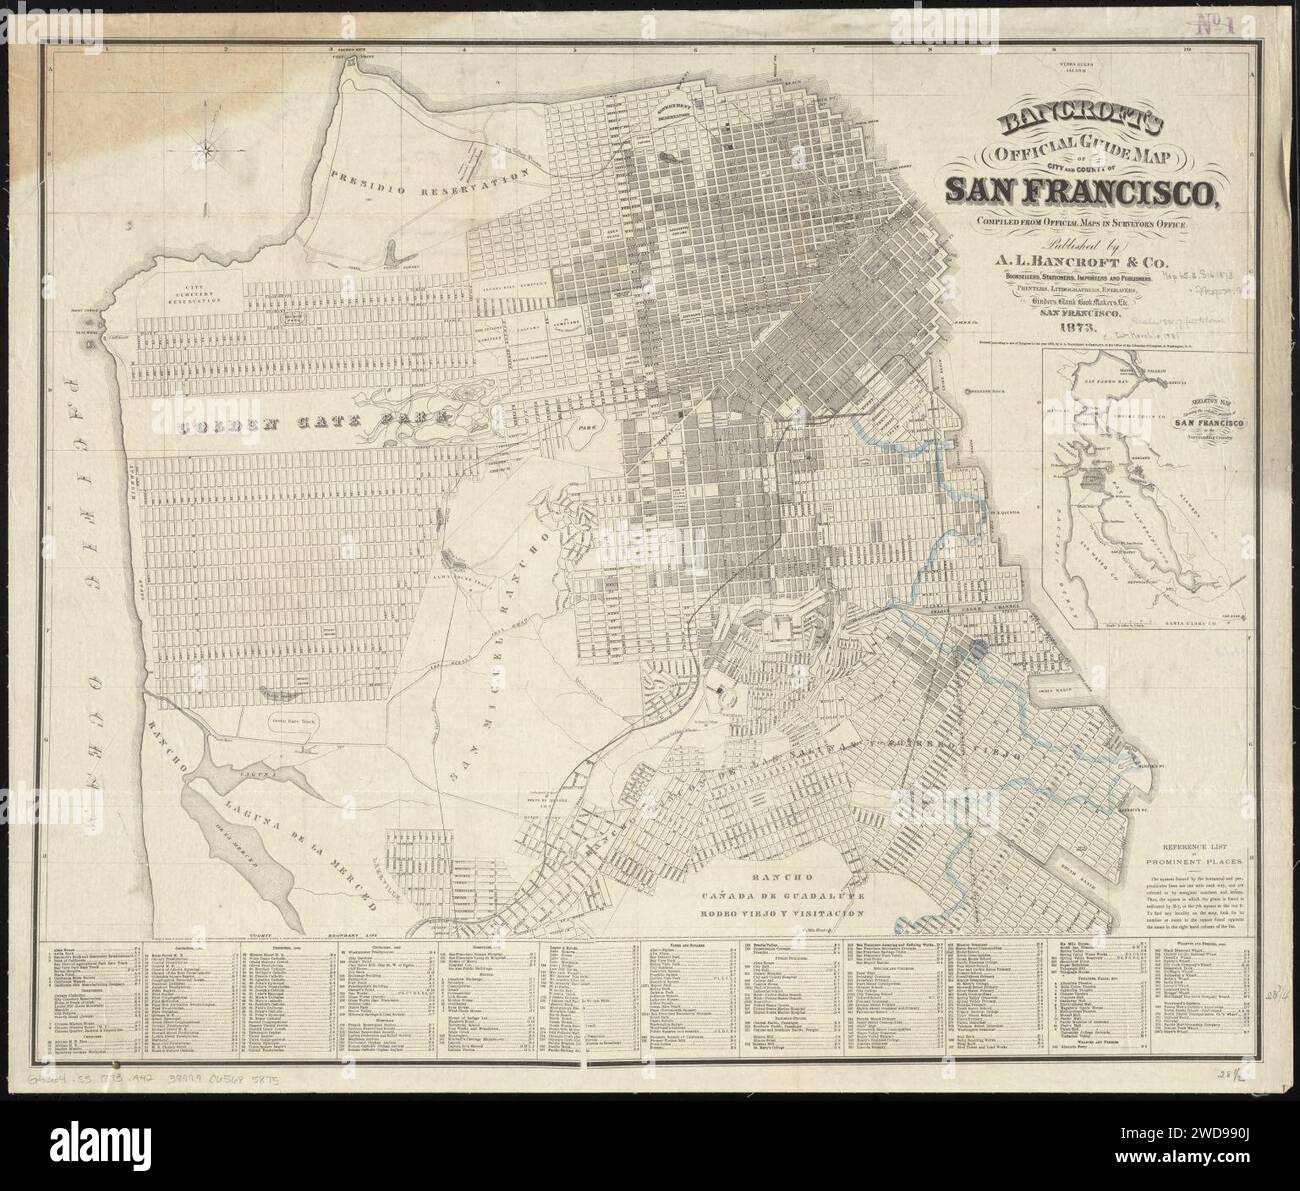 1873 Bancroft's official guide map of city and county of San Francisco, compiled from official maps in Surveyor's Office, by A.L. Bancroft & Company, Stock Photo